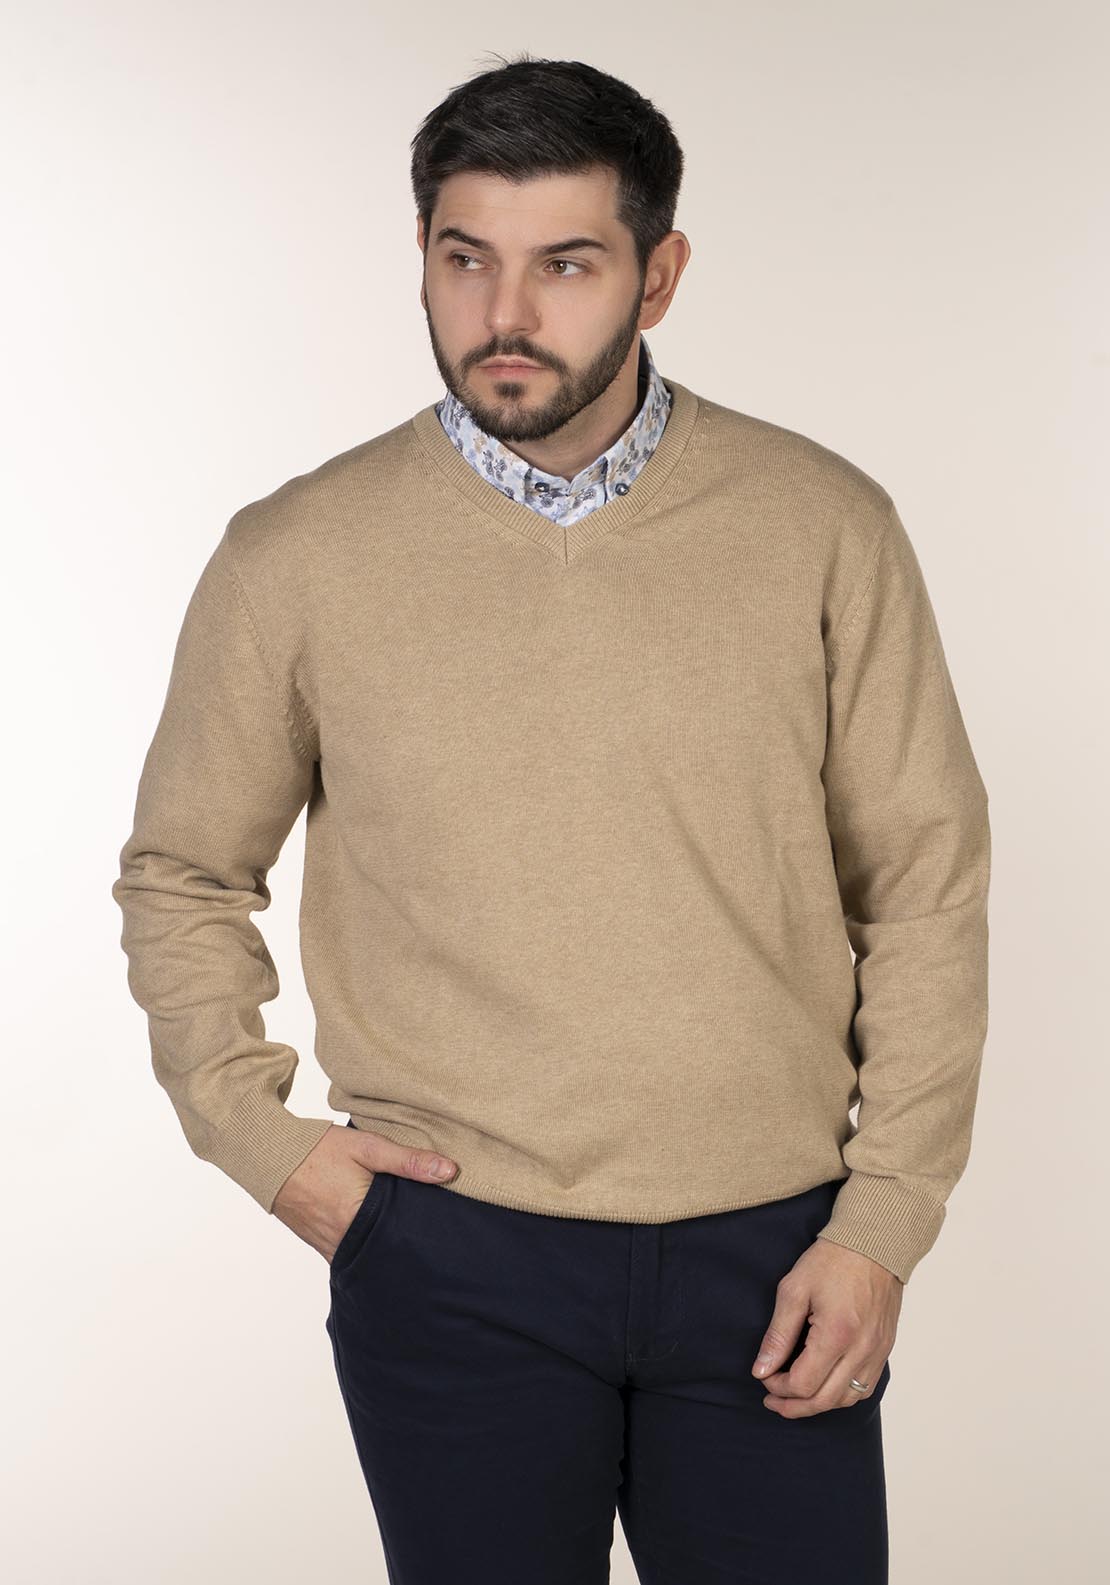 Yeats Plain Cotton V Neck Sweaters - Beige 2 Shaws Department Stores